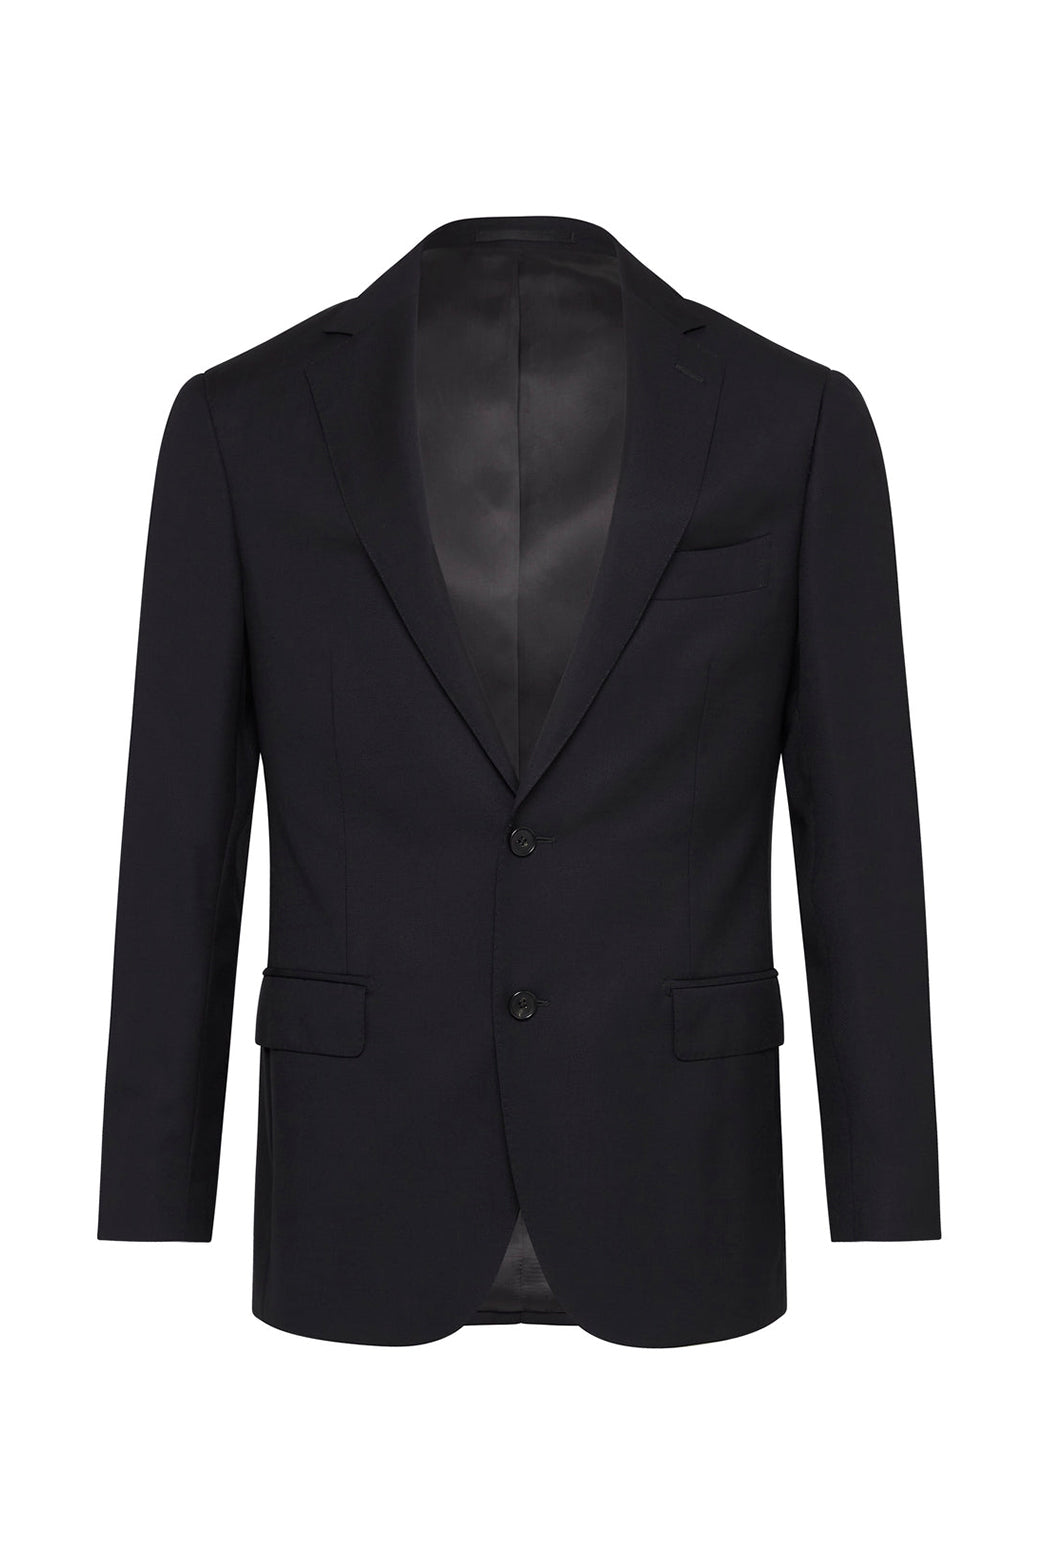 Mens Slim Fit Business Charcoal Grey Waistcoat Jacket In Black And Grey  Burgundy For Formal Occasions Perfect For Groomsmen And Groom From  Xiamen2013, $31.7 | DHgate.Com